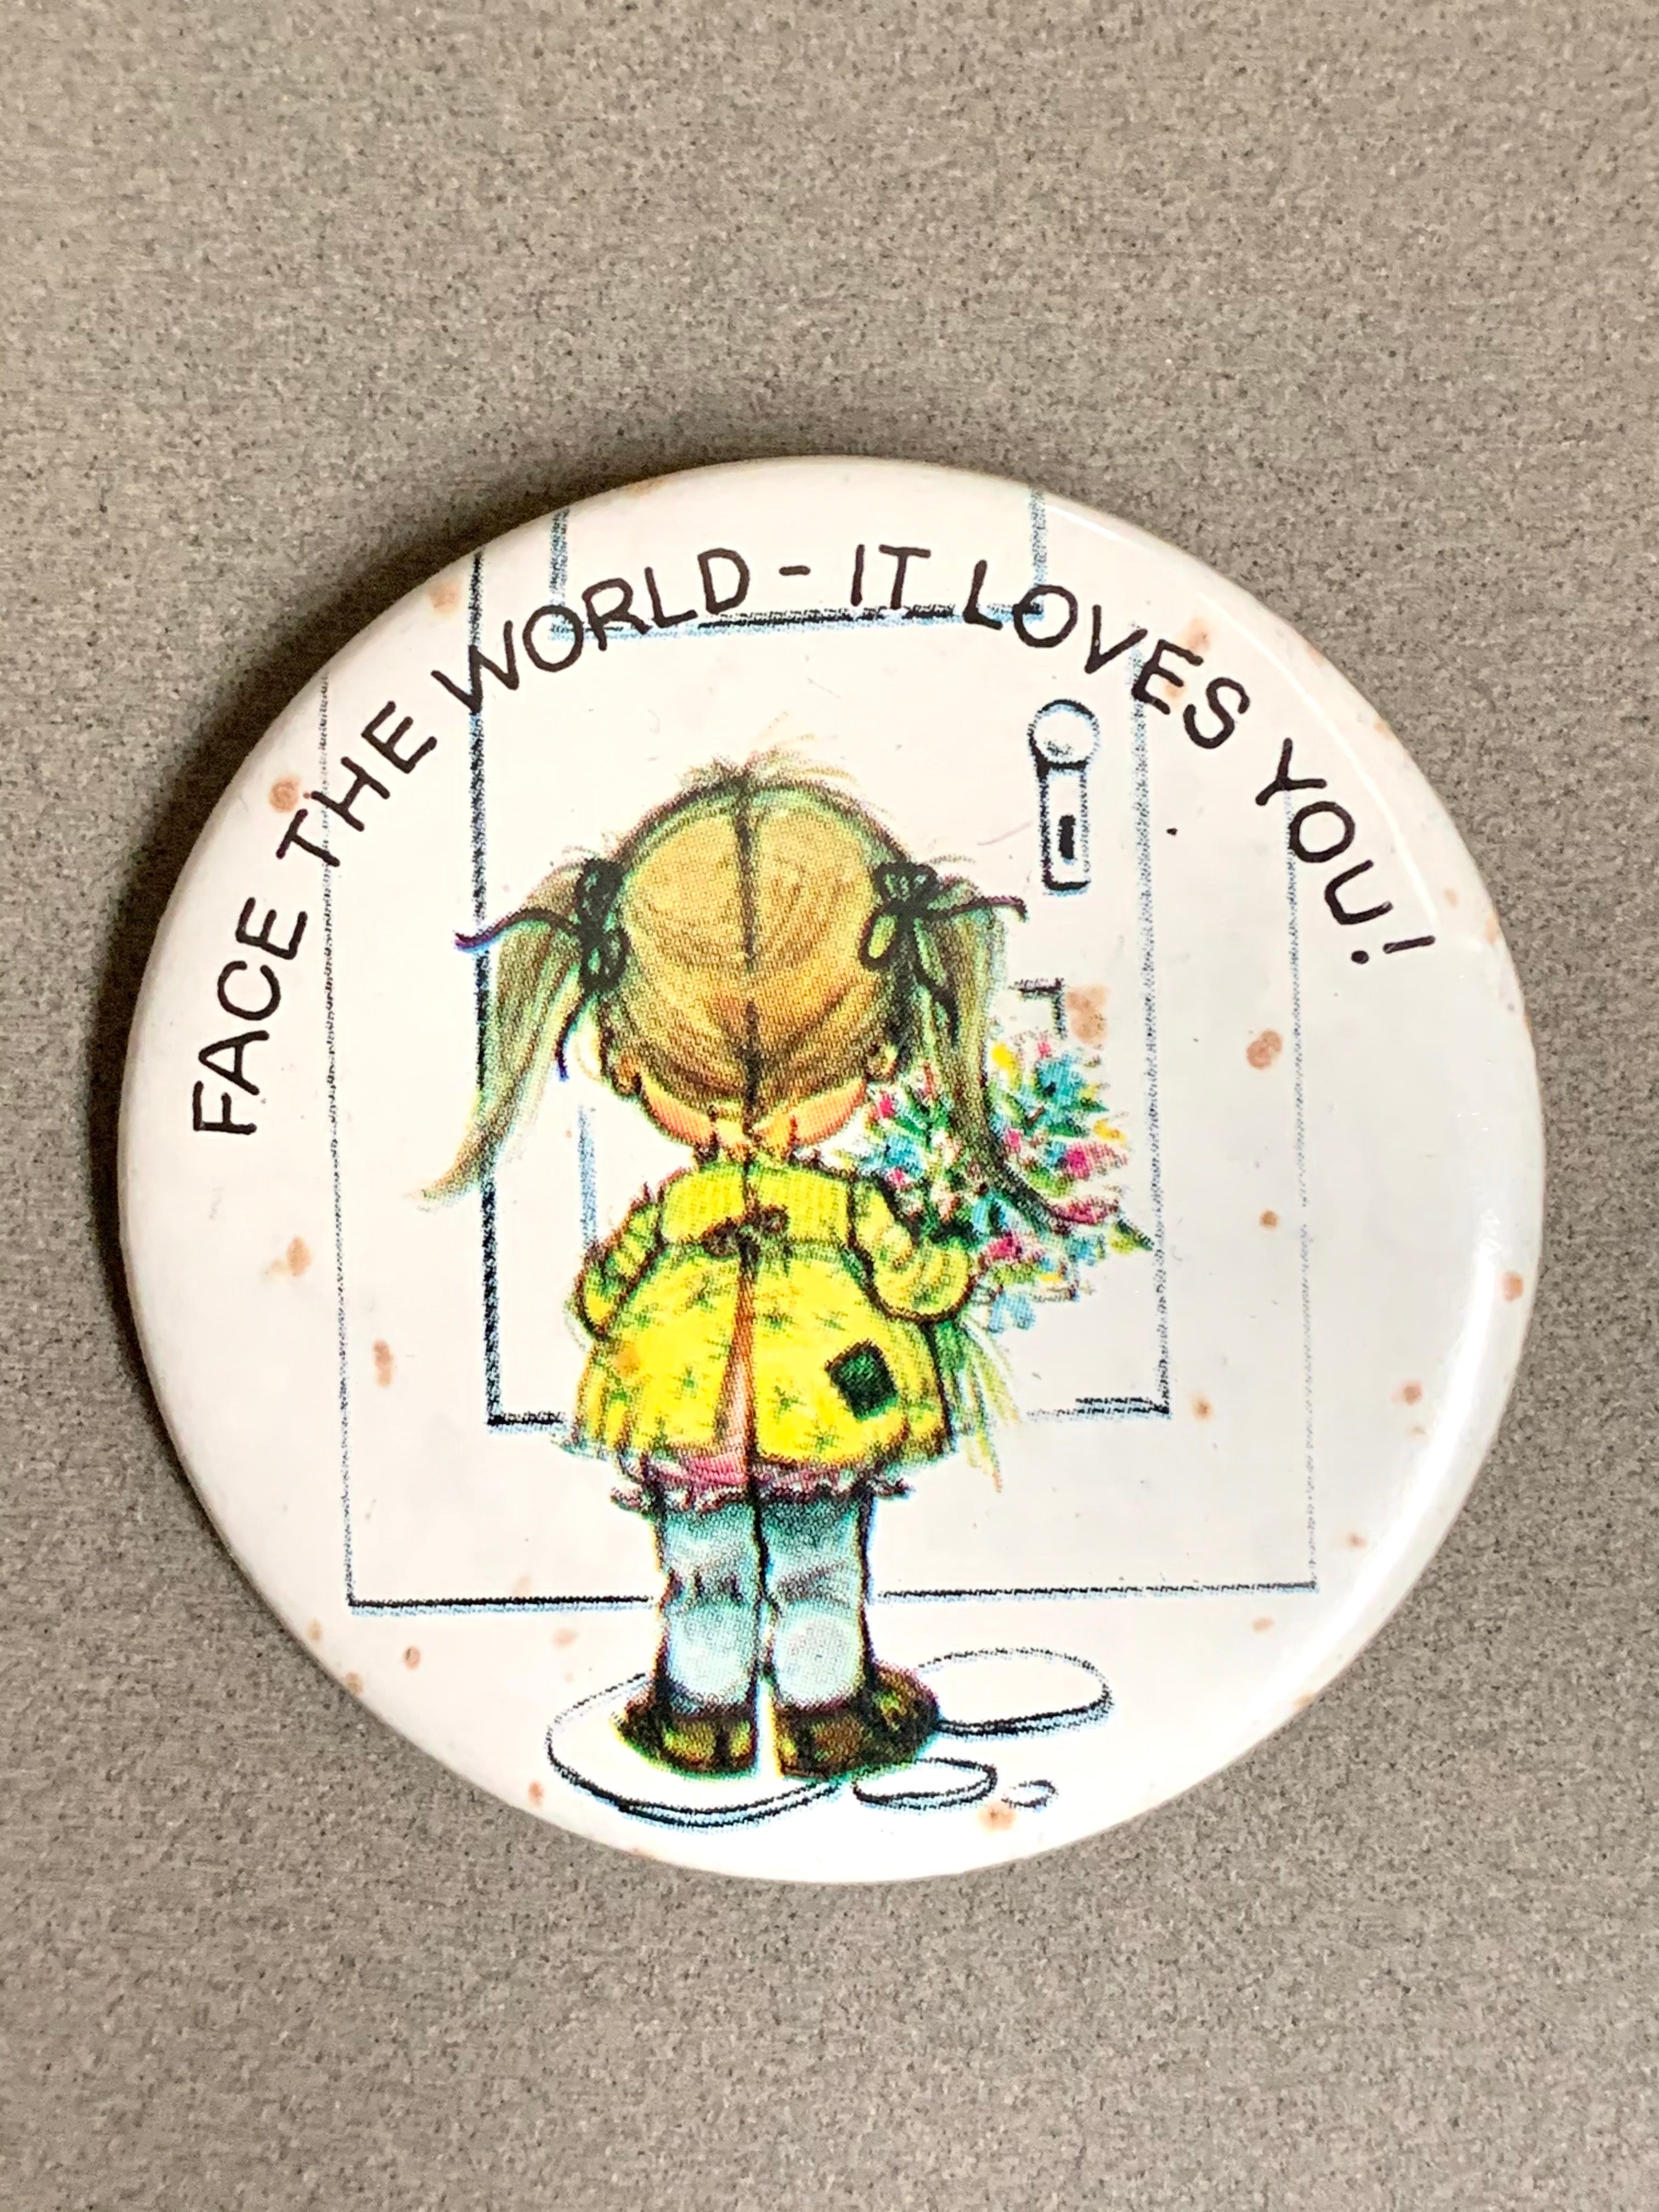 Face The World - It Loves You! Vintage Norcross Inc. Pinback Button Girl w/ Flowers